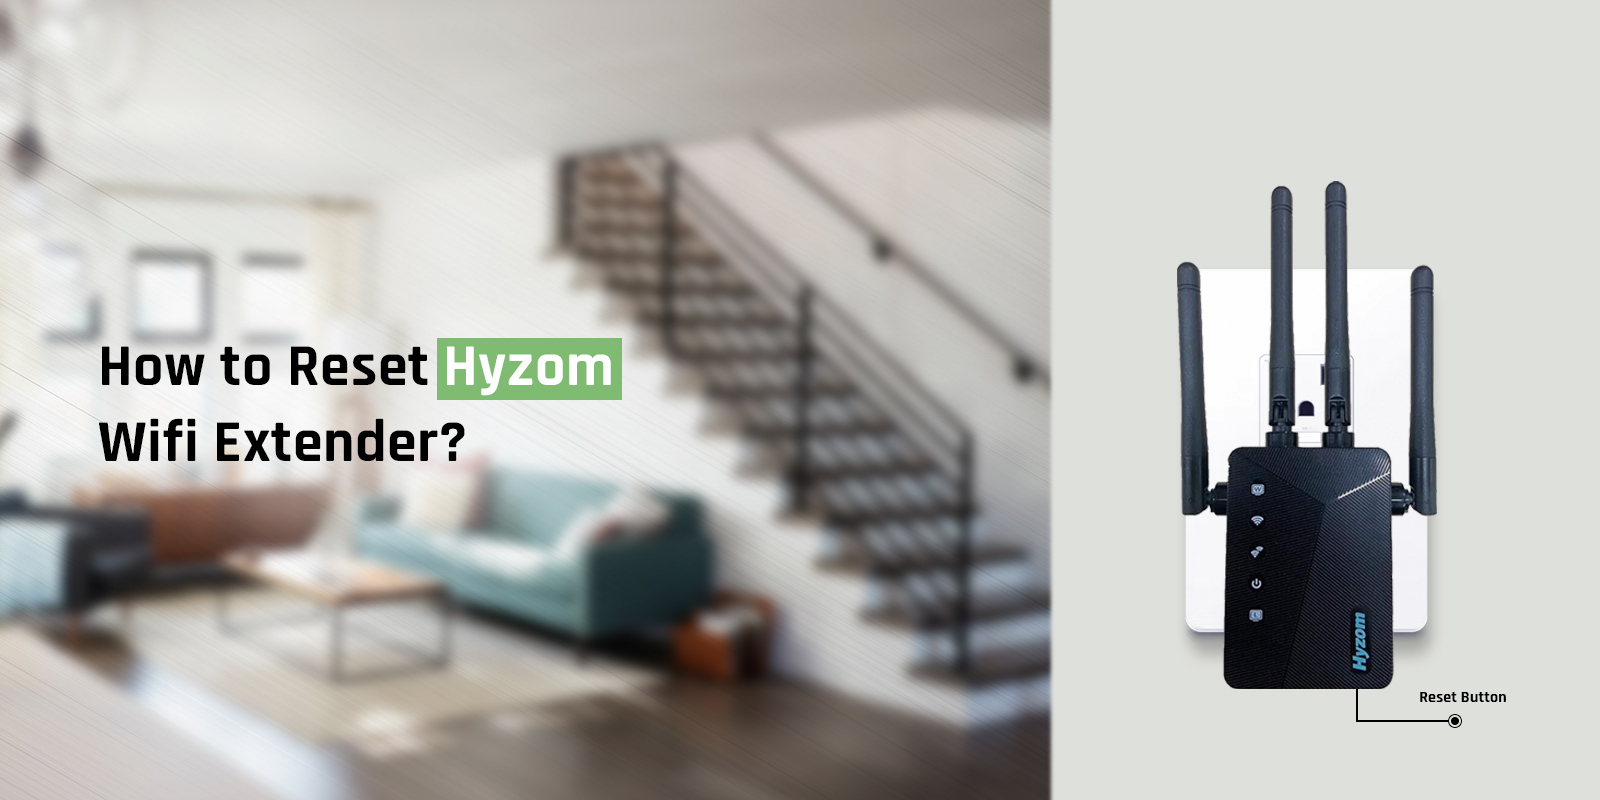 How-to-Reset-Hyzom-wifi-extender